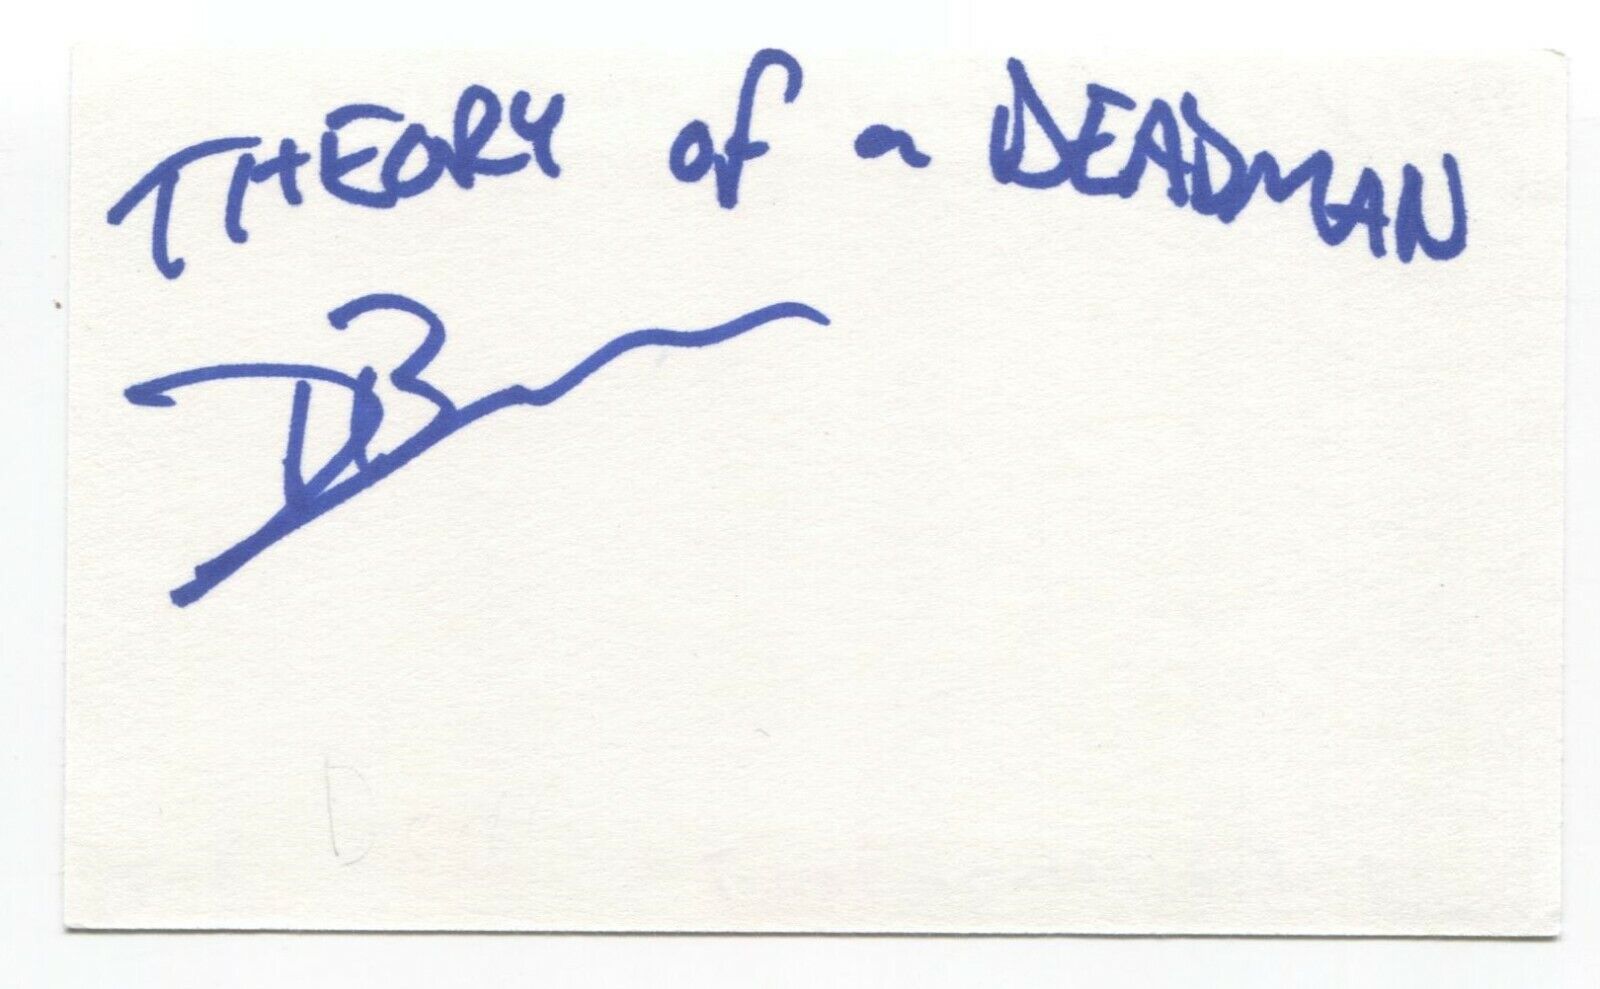 Theory of a Deadman - Dave Brenner Signed 3x5 Index Card Autographed Signature